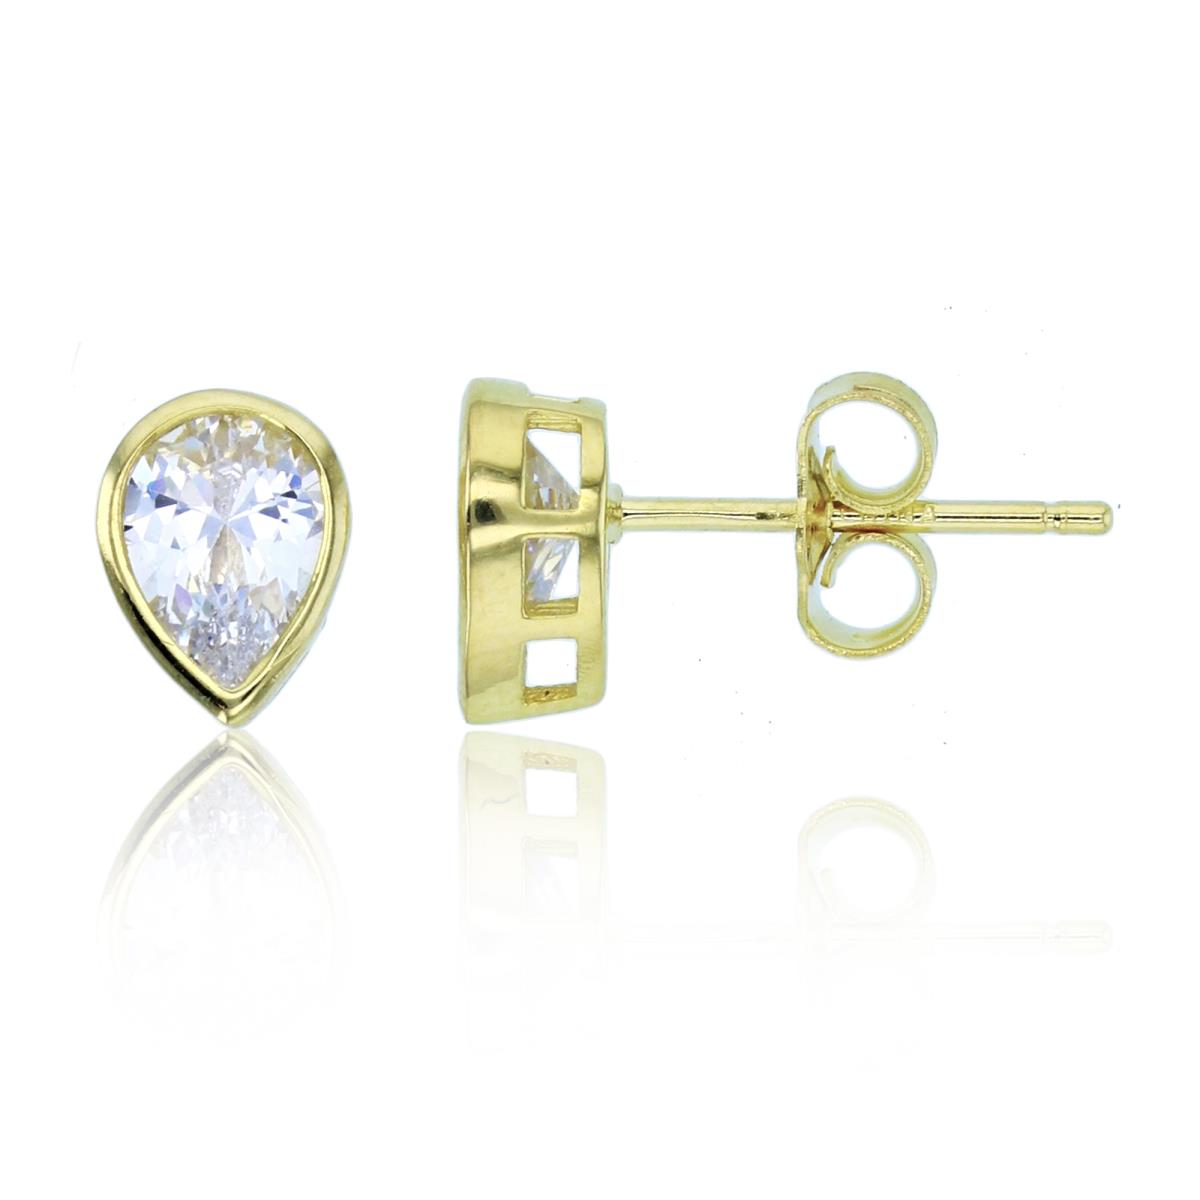 Sterling Silver+1Micron Yellow Gold 7x5mm Pear-shaped CZ Bezel Studs